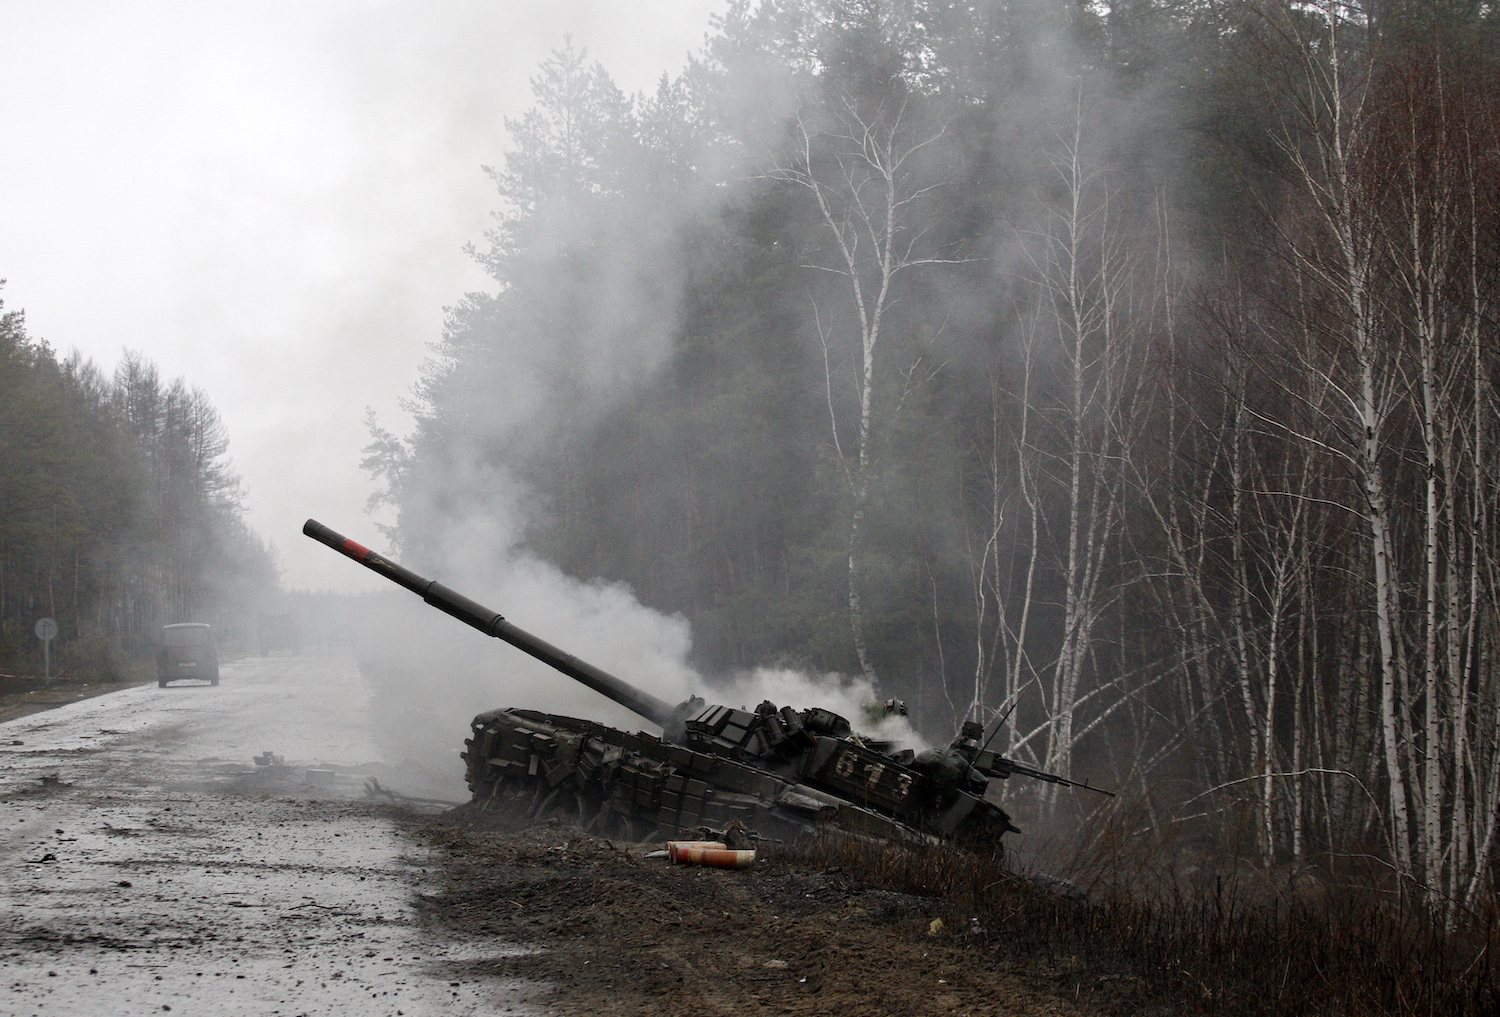 Russian tank burning by the side of a Ukrainian road, birch trees visible in the background.